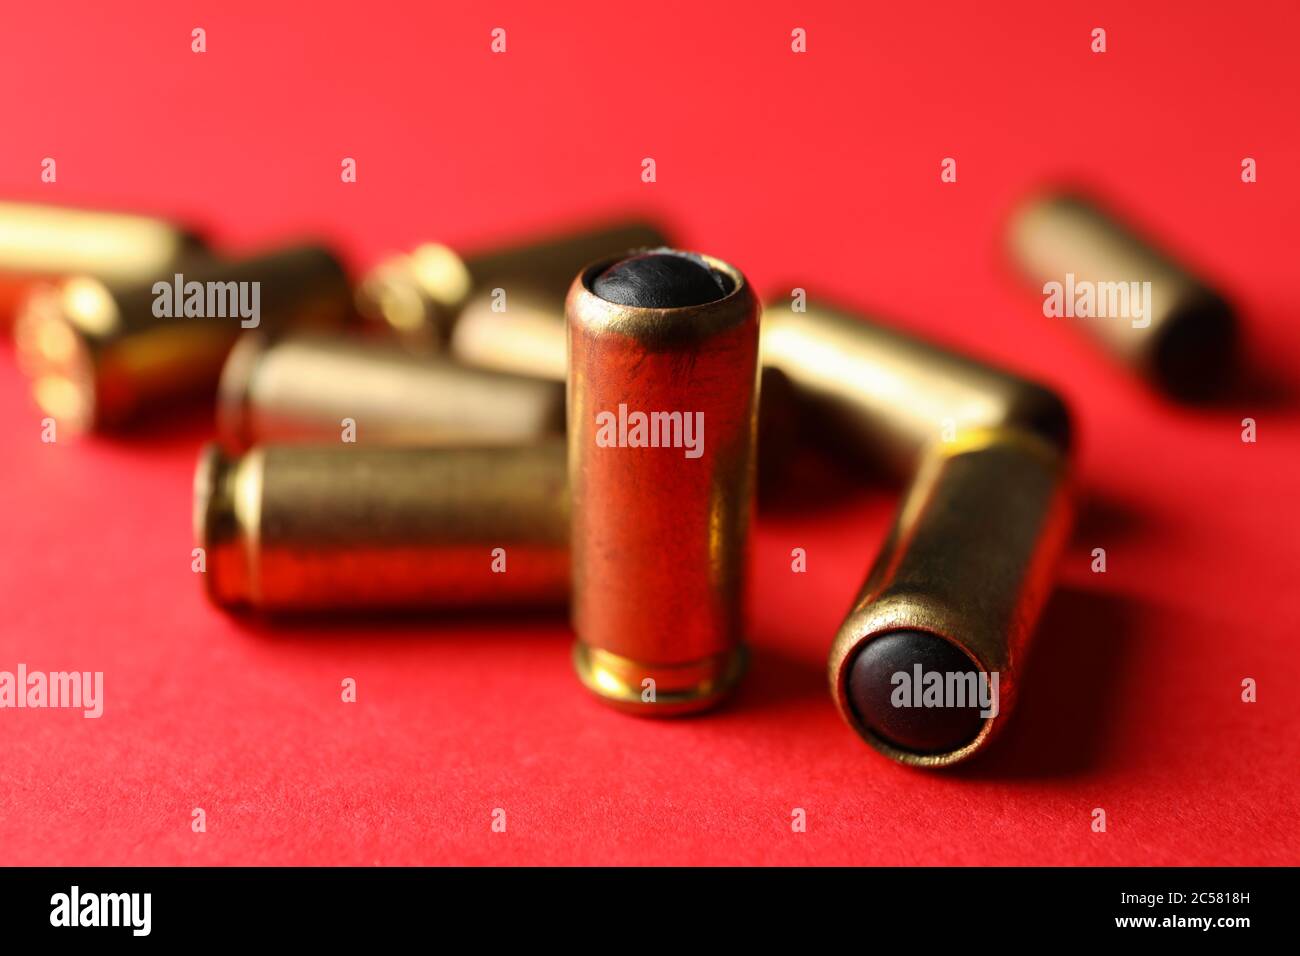 Rubber bullets on red background, close up Stock Photo